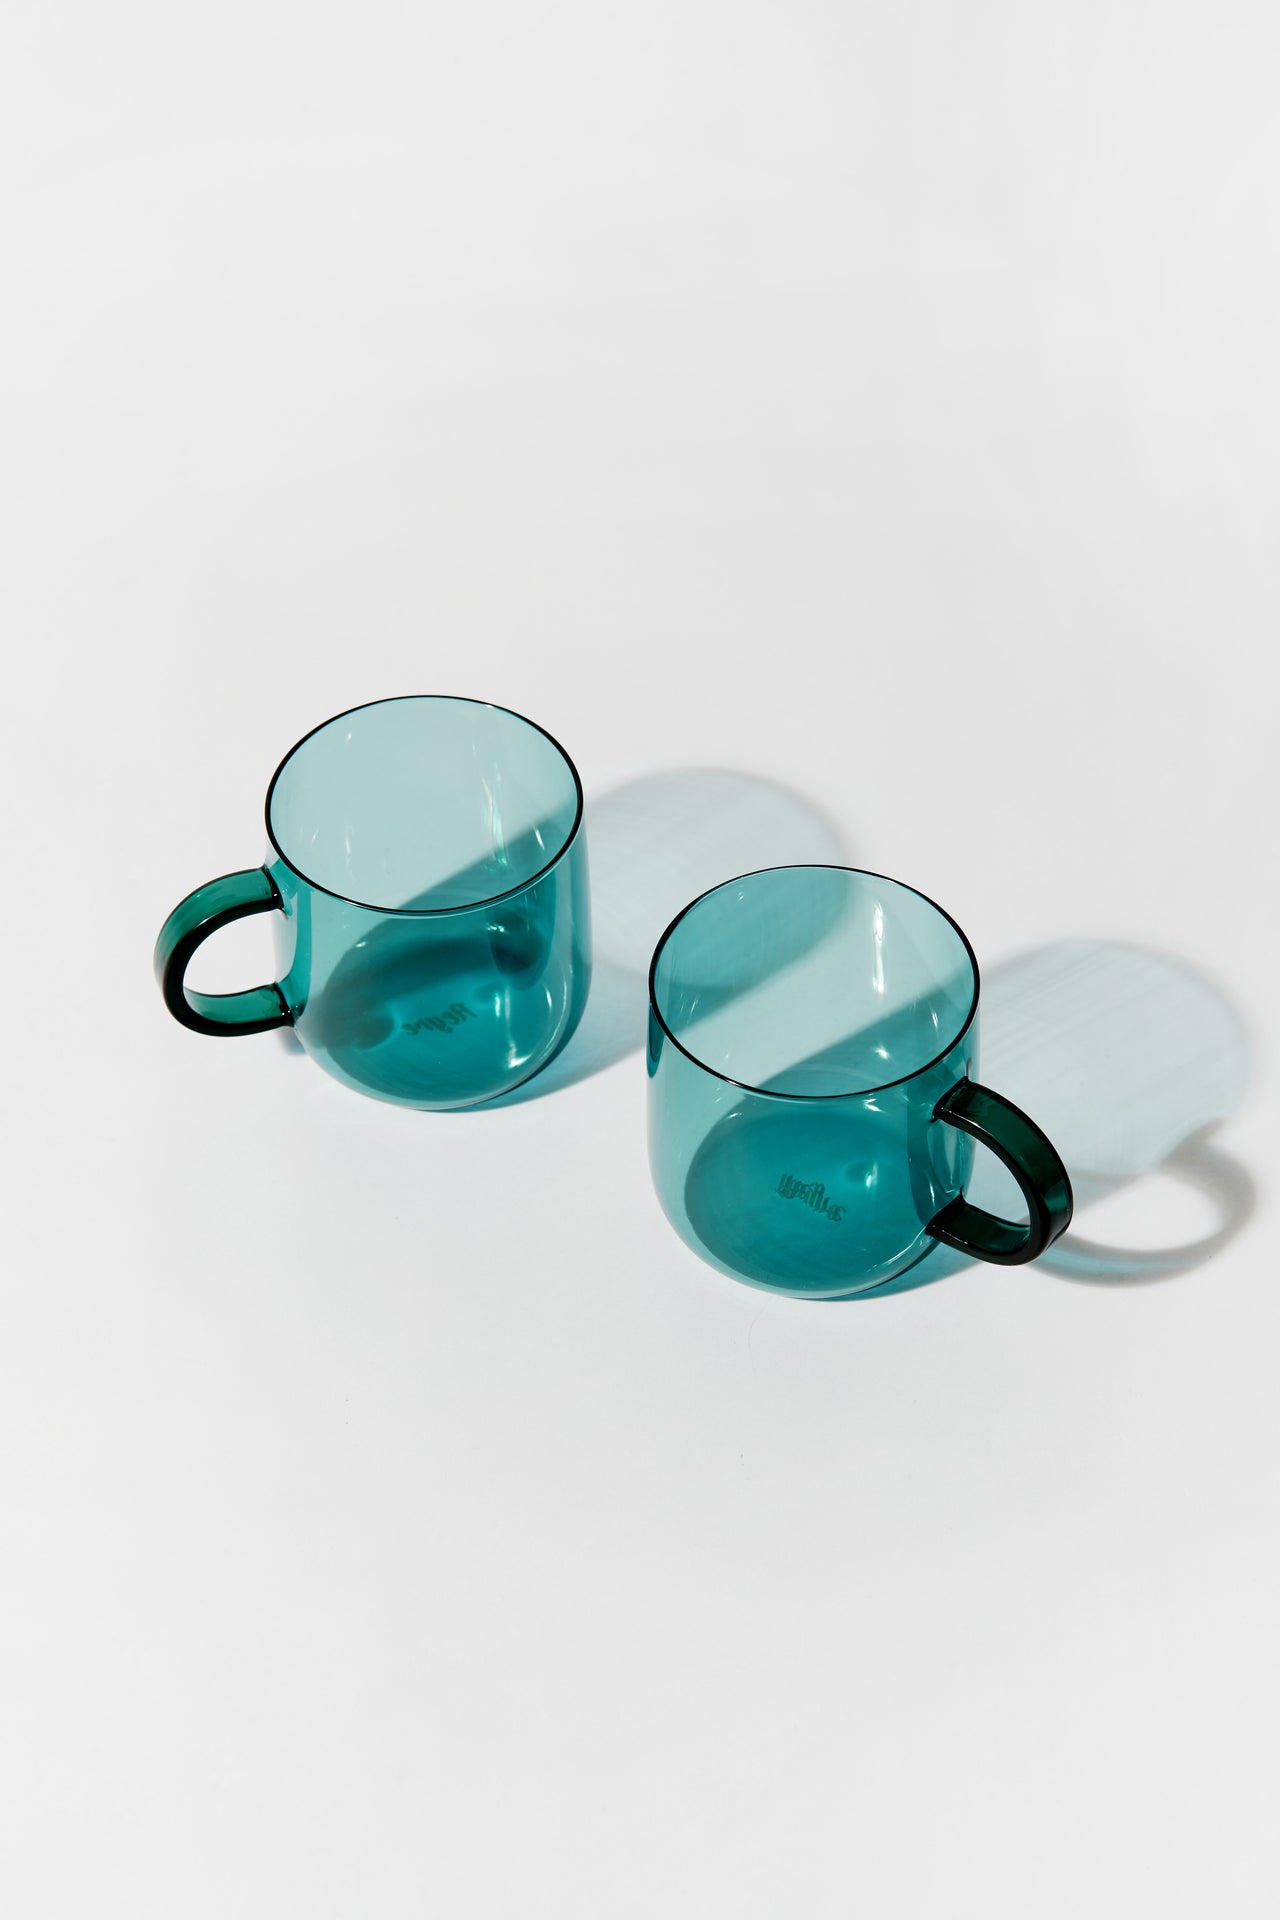 CORO CUP SET IN TEAL